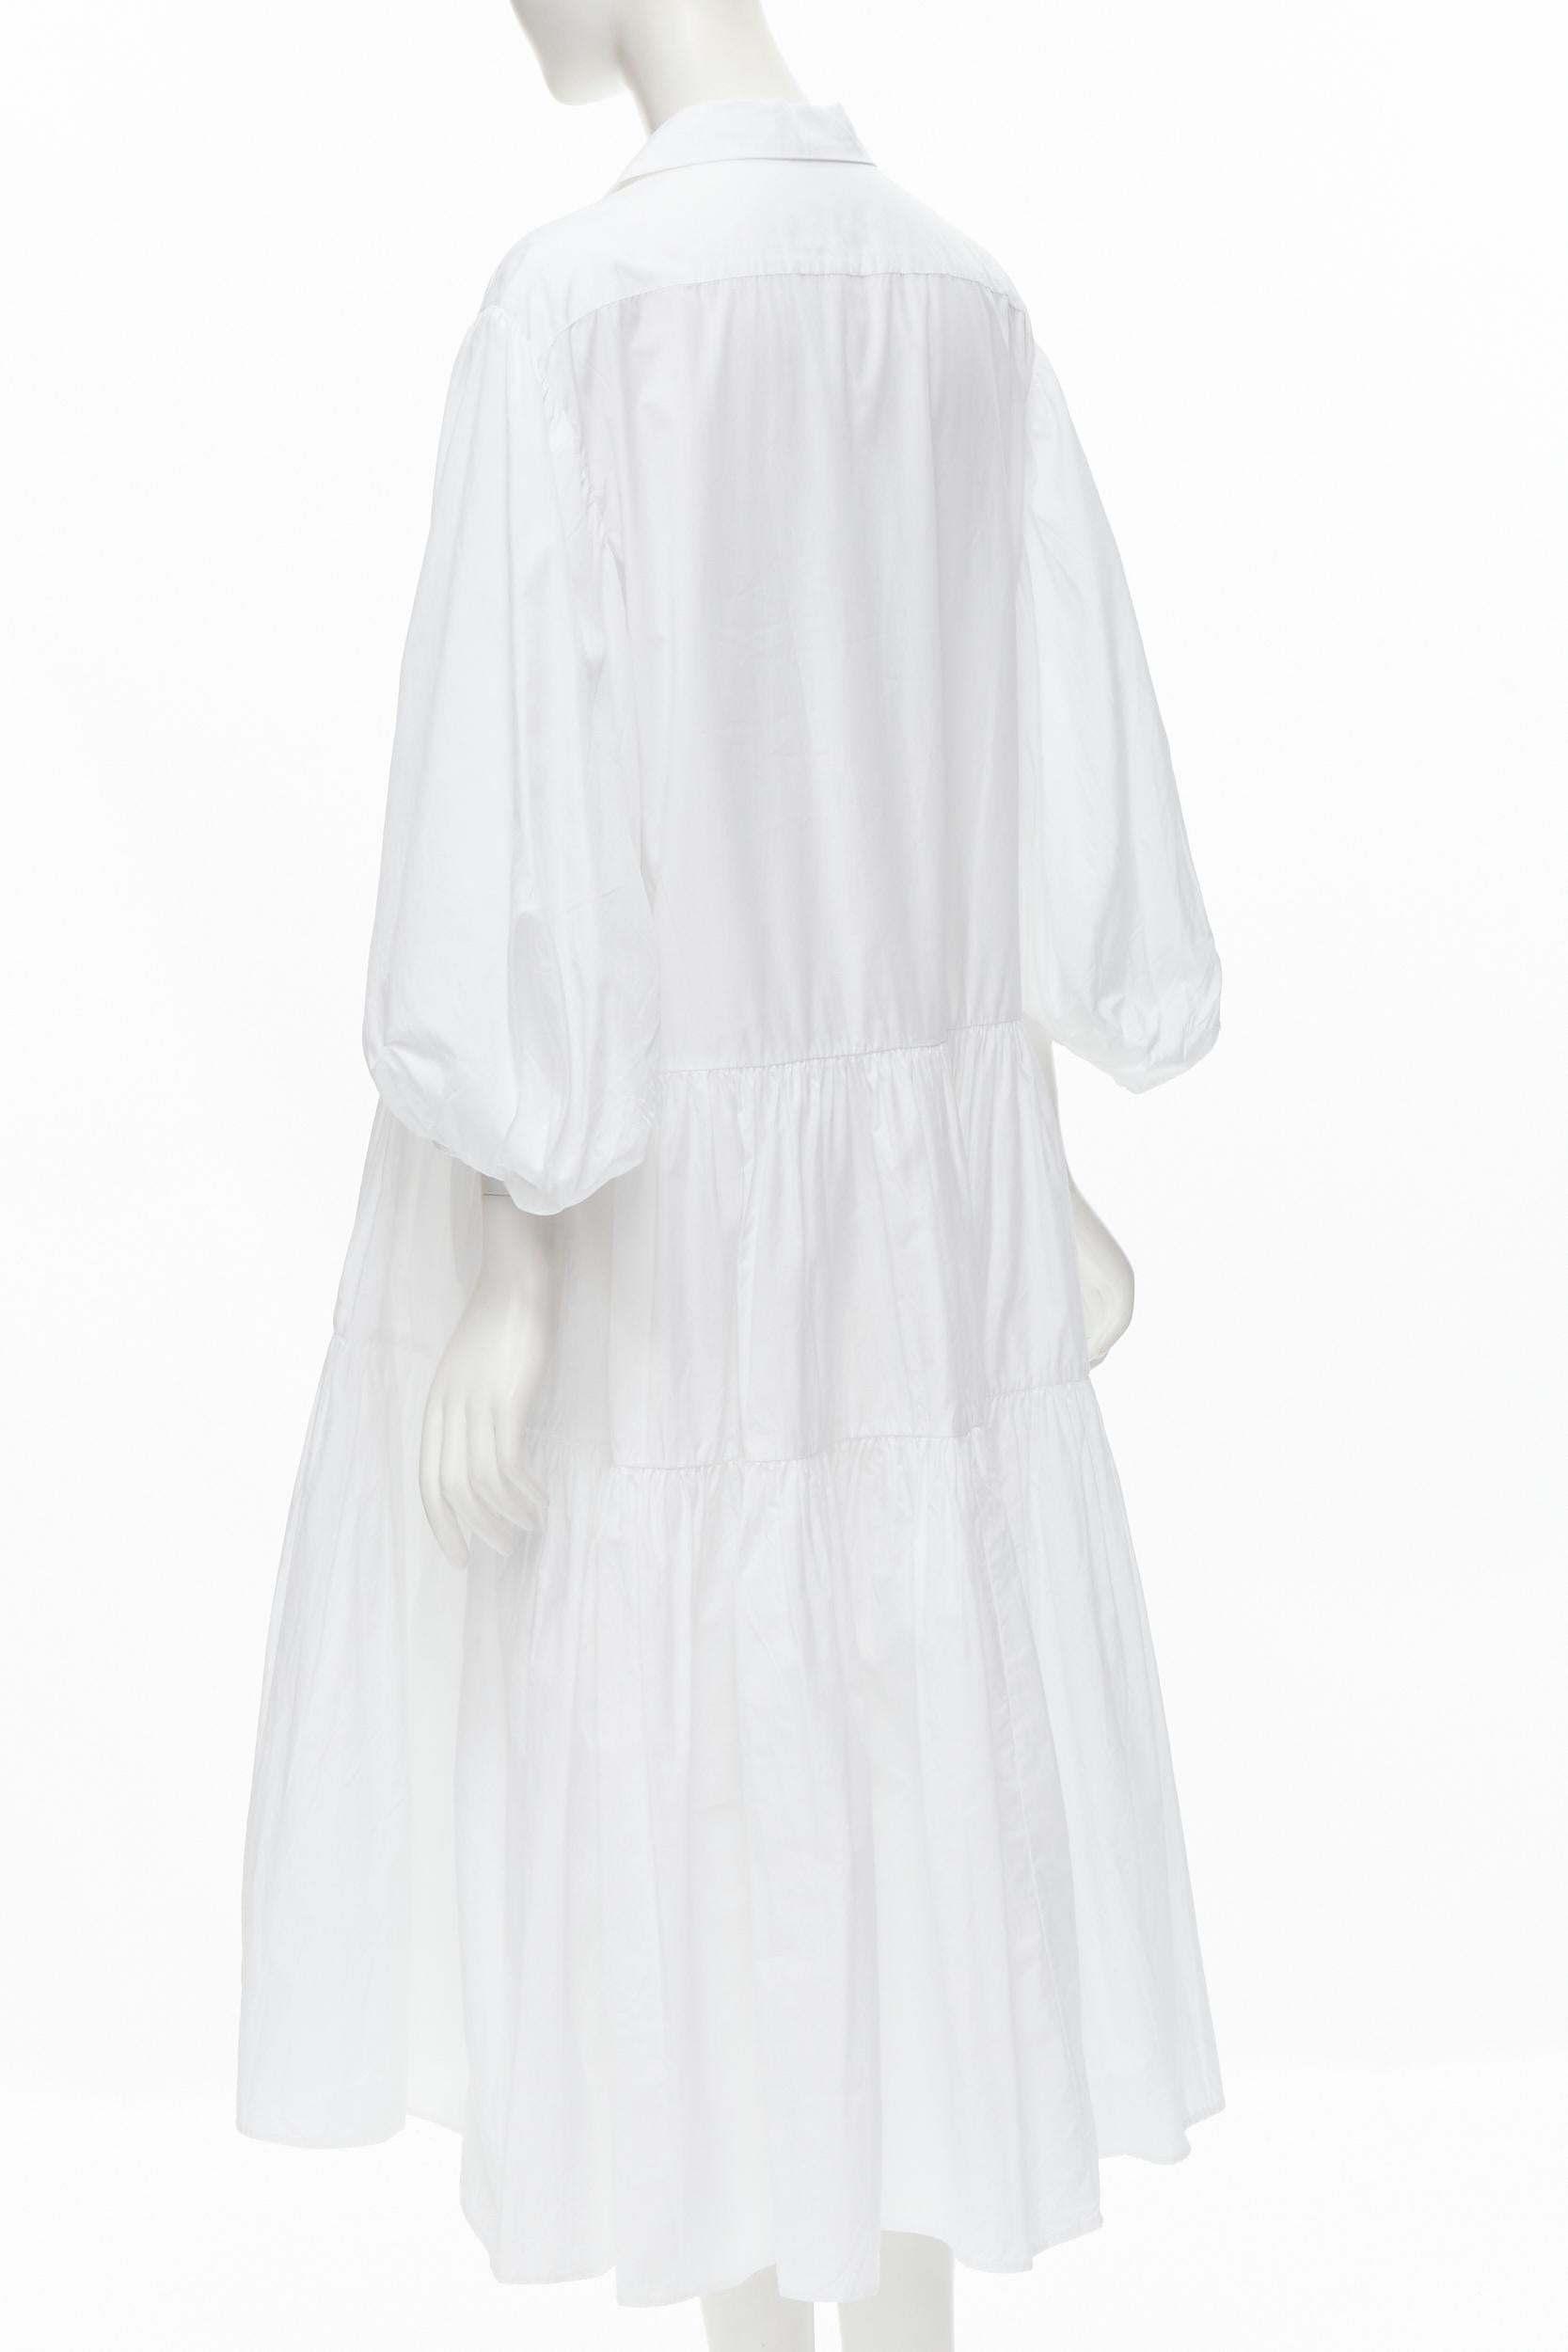 Gray CECILIE BAHNSEN Amy white cotton poplin tiered shirred flared moumou dress UK6 S For Sale